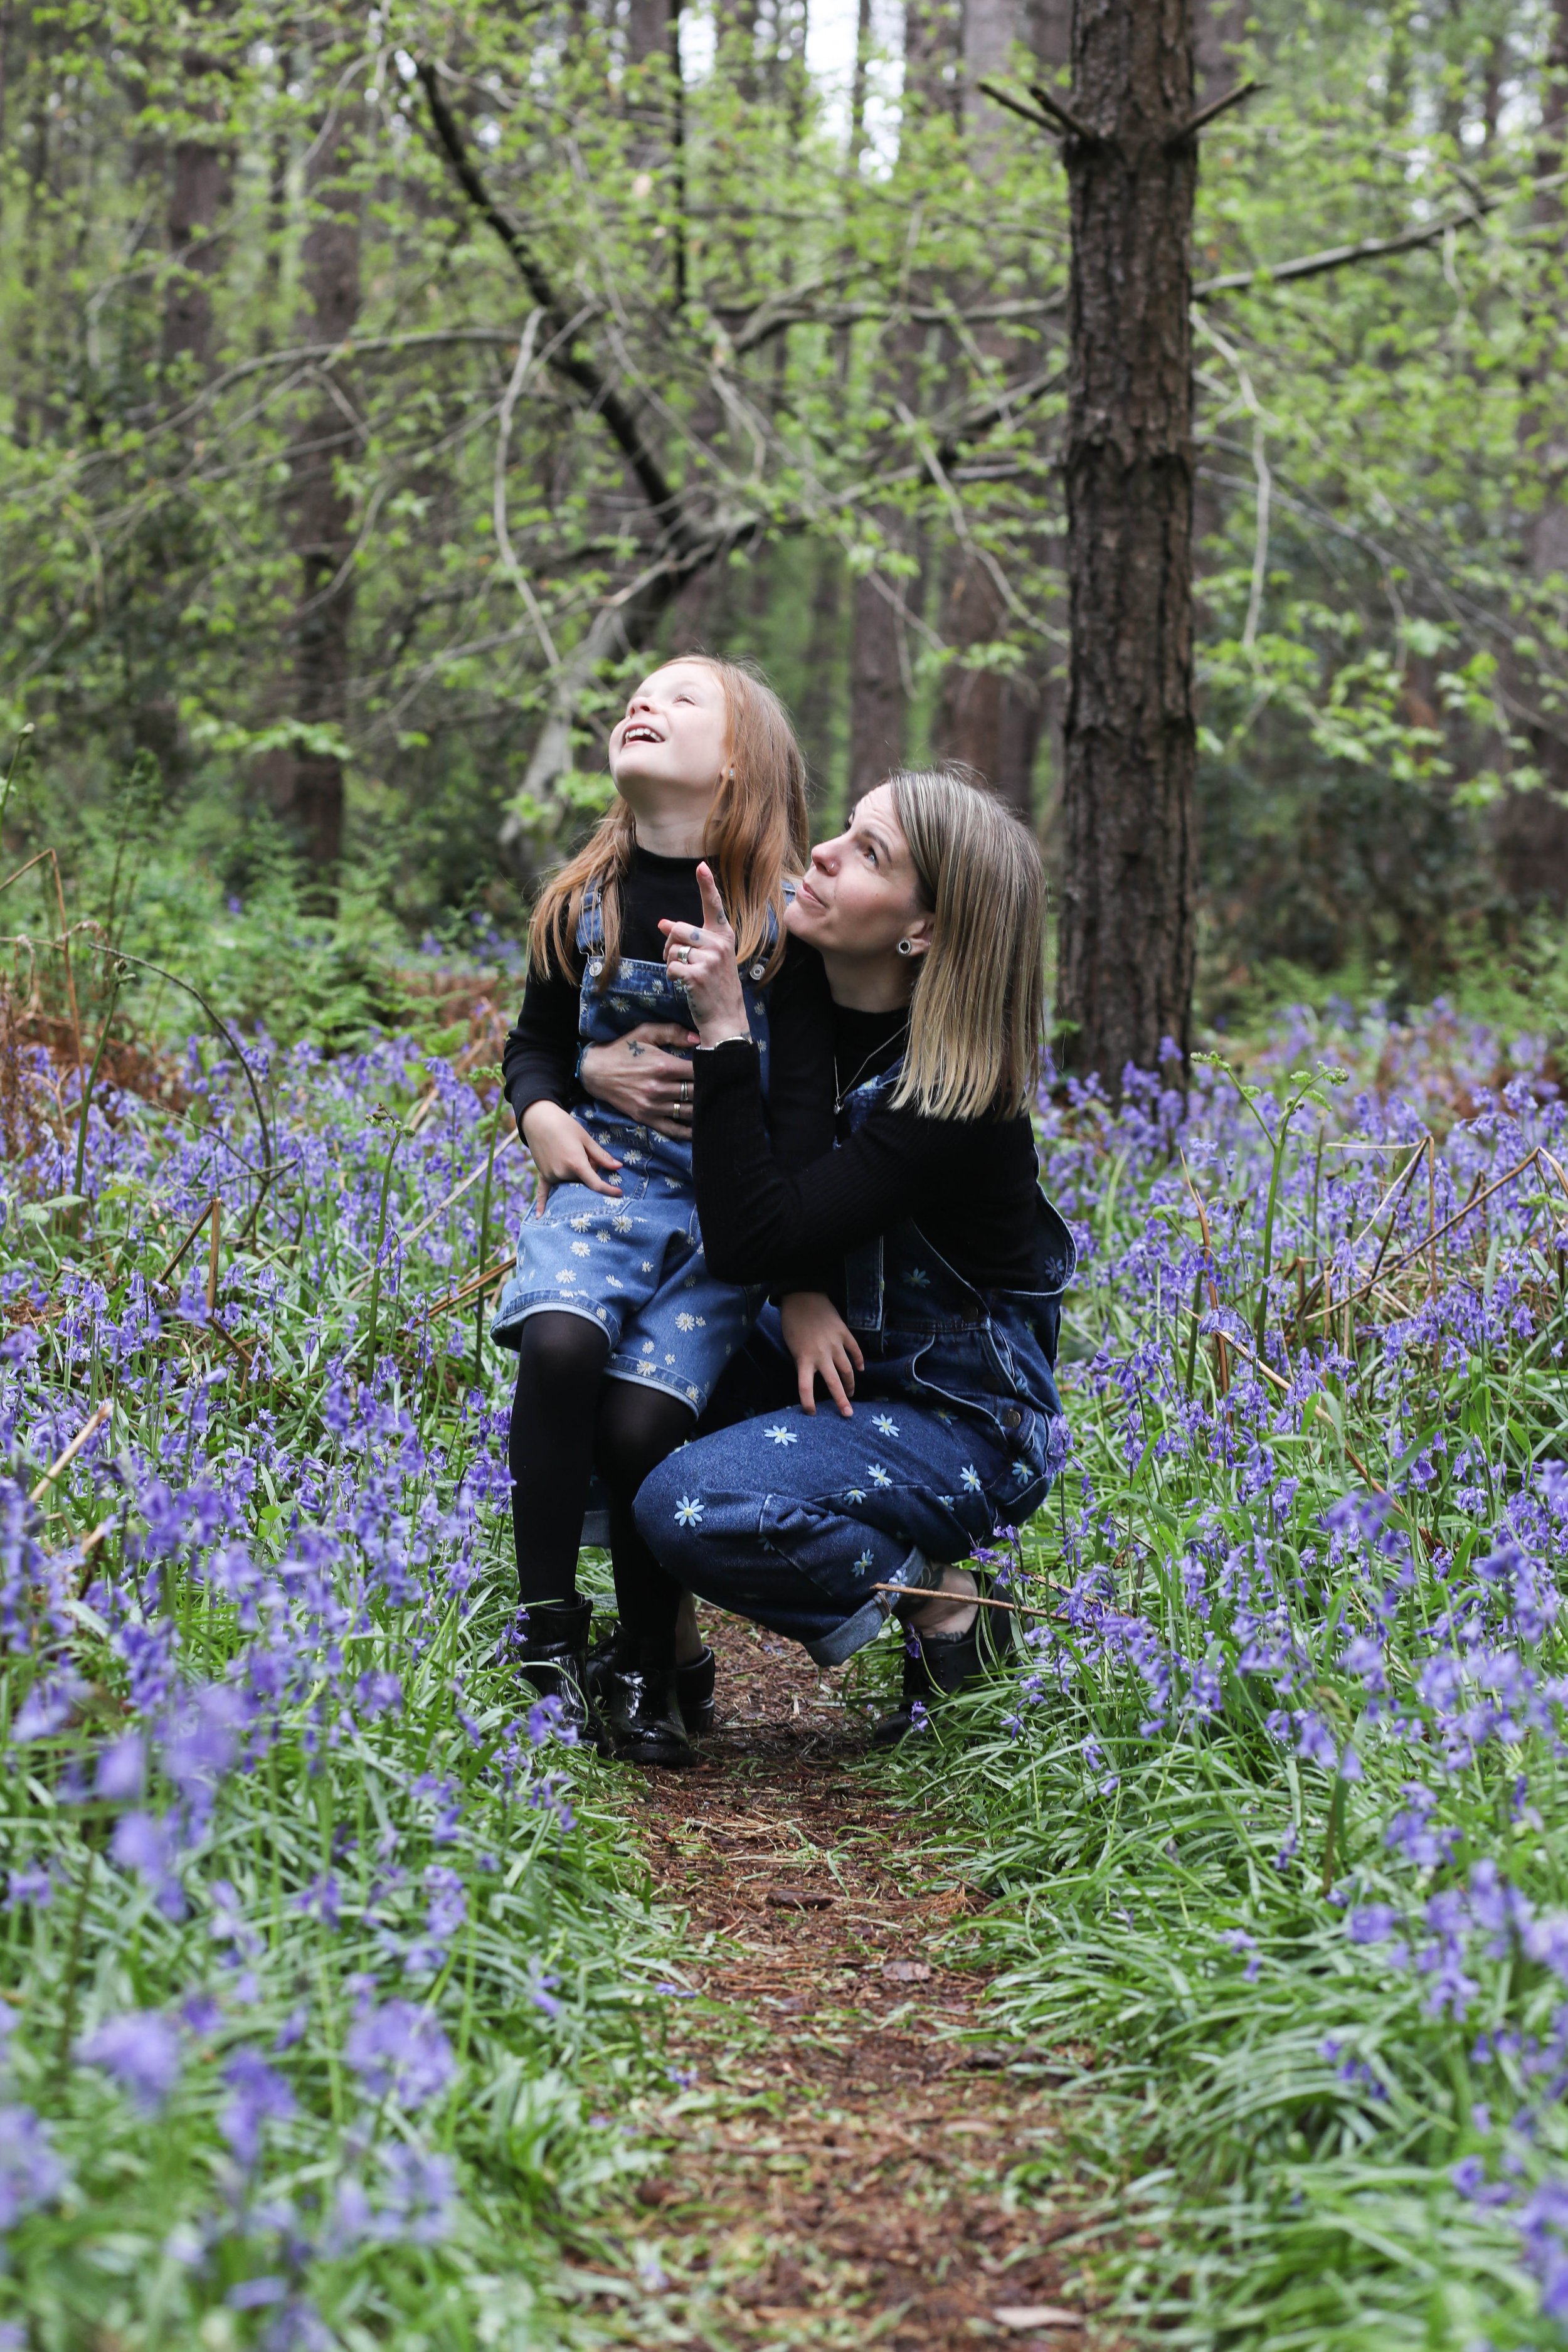 MUM AND DAUGHTER PHOTO SHOOT IN THE BLUEBELLS | BERKSHIRE PORTRAIT SHOOTS32 choice .JPG